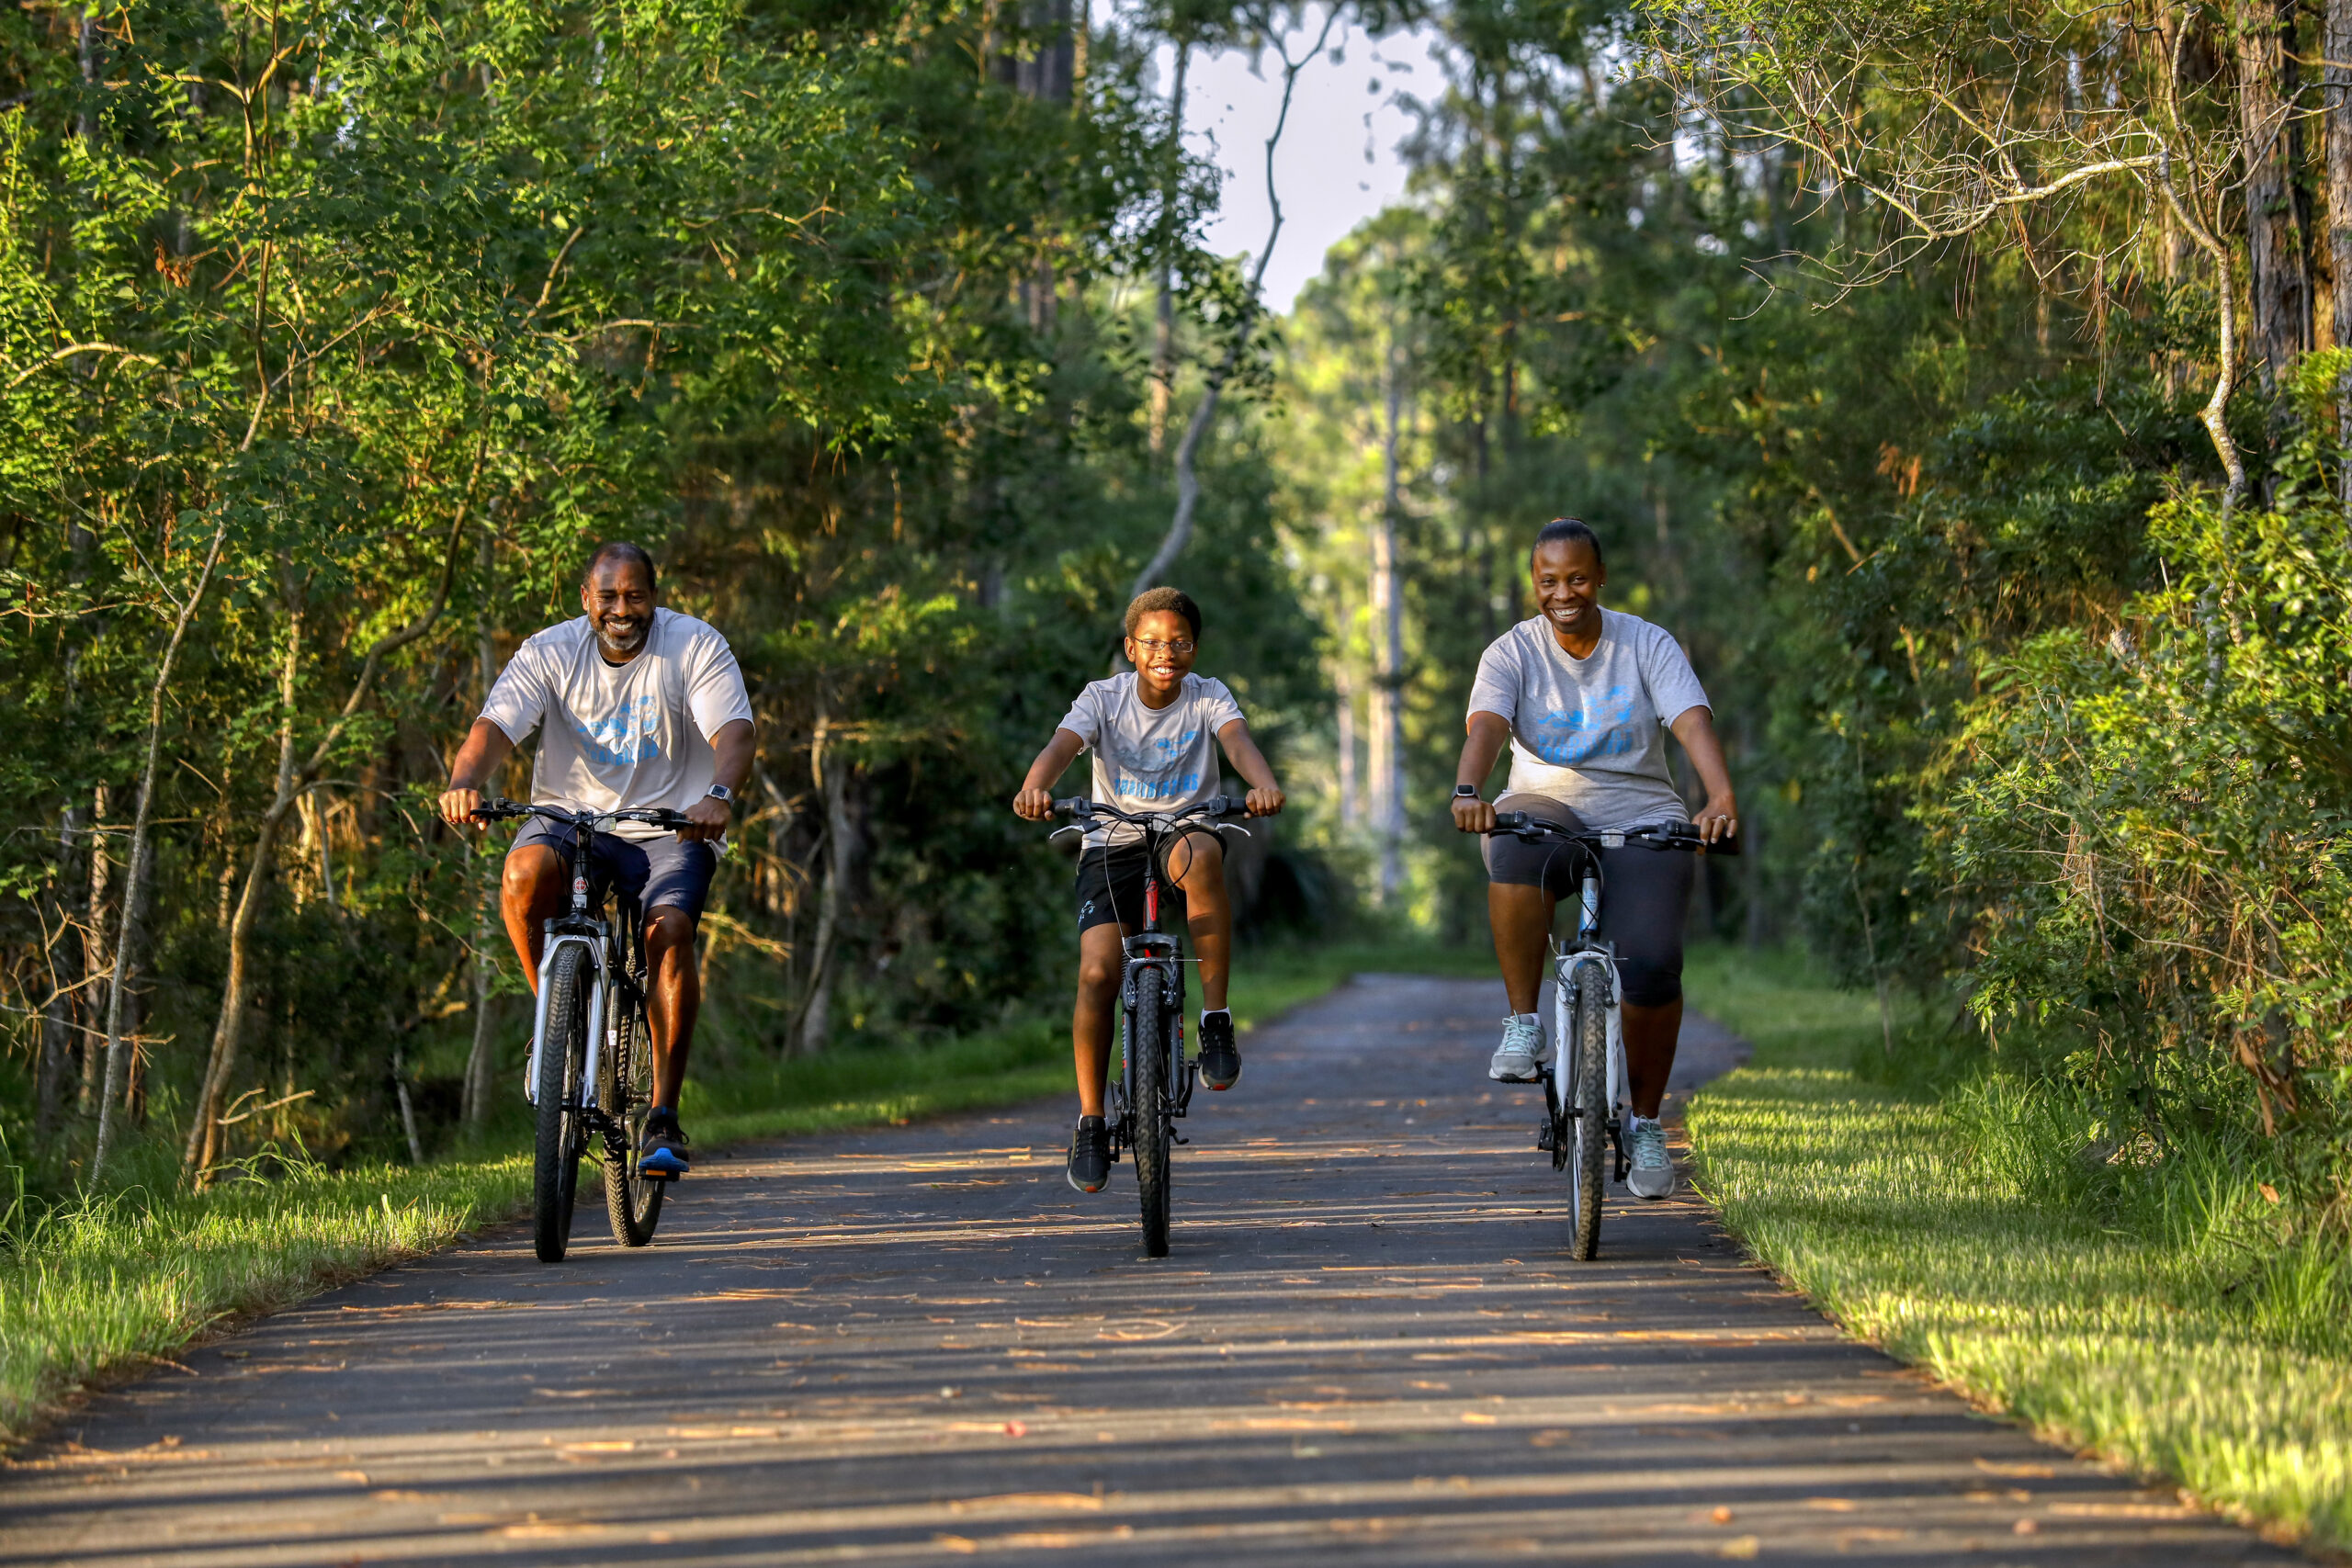 Three people riding bicycles down a path in a wooded area.